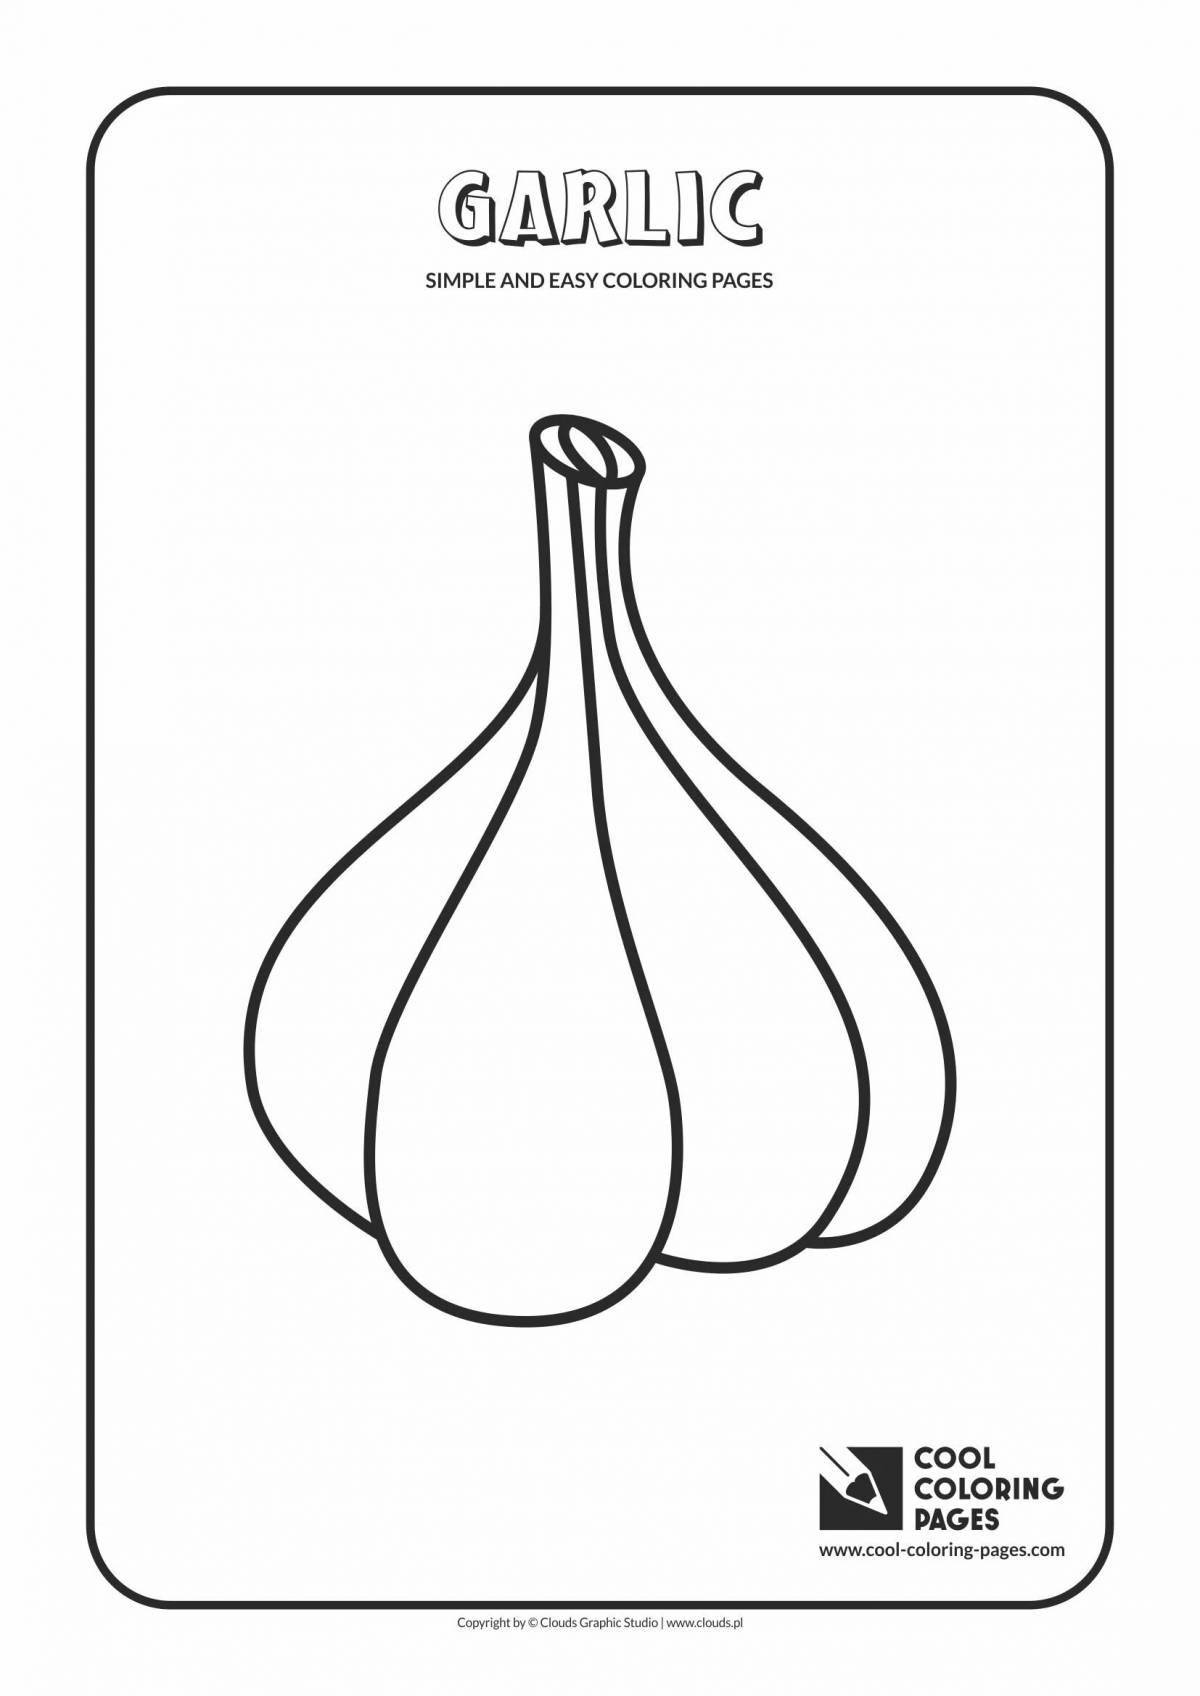 Attractive garlic coloring book for kids